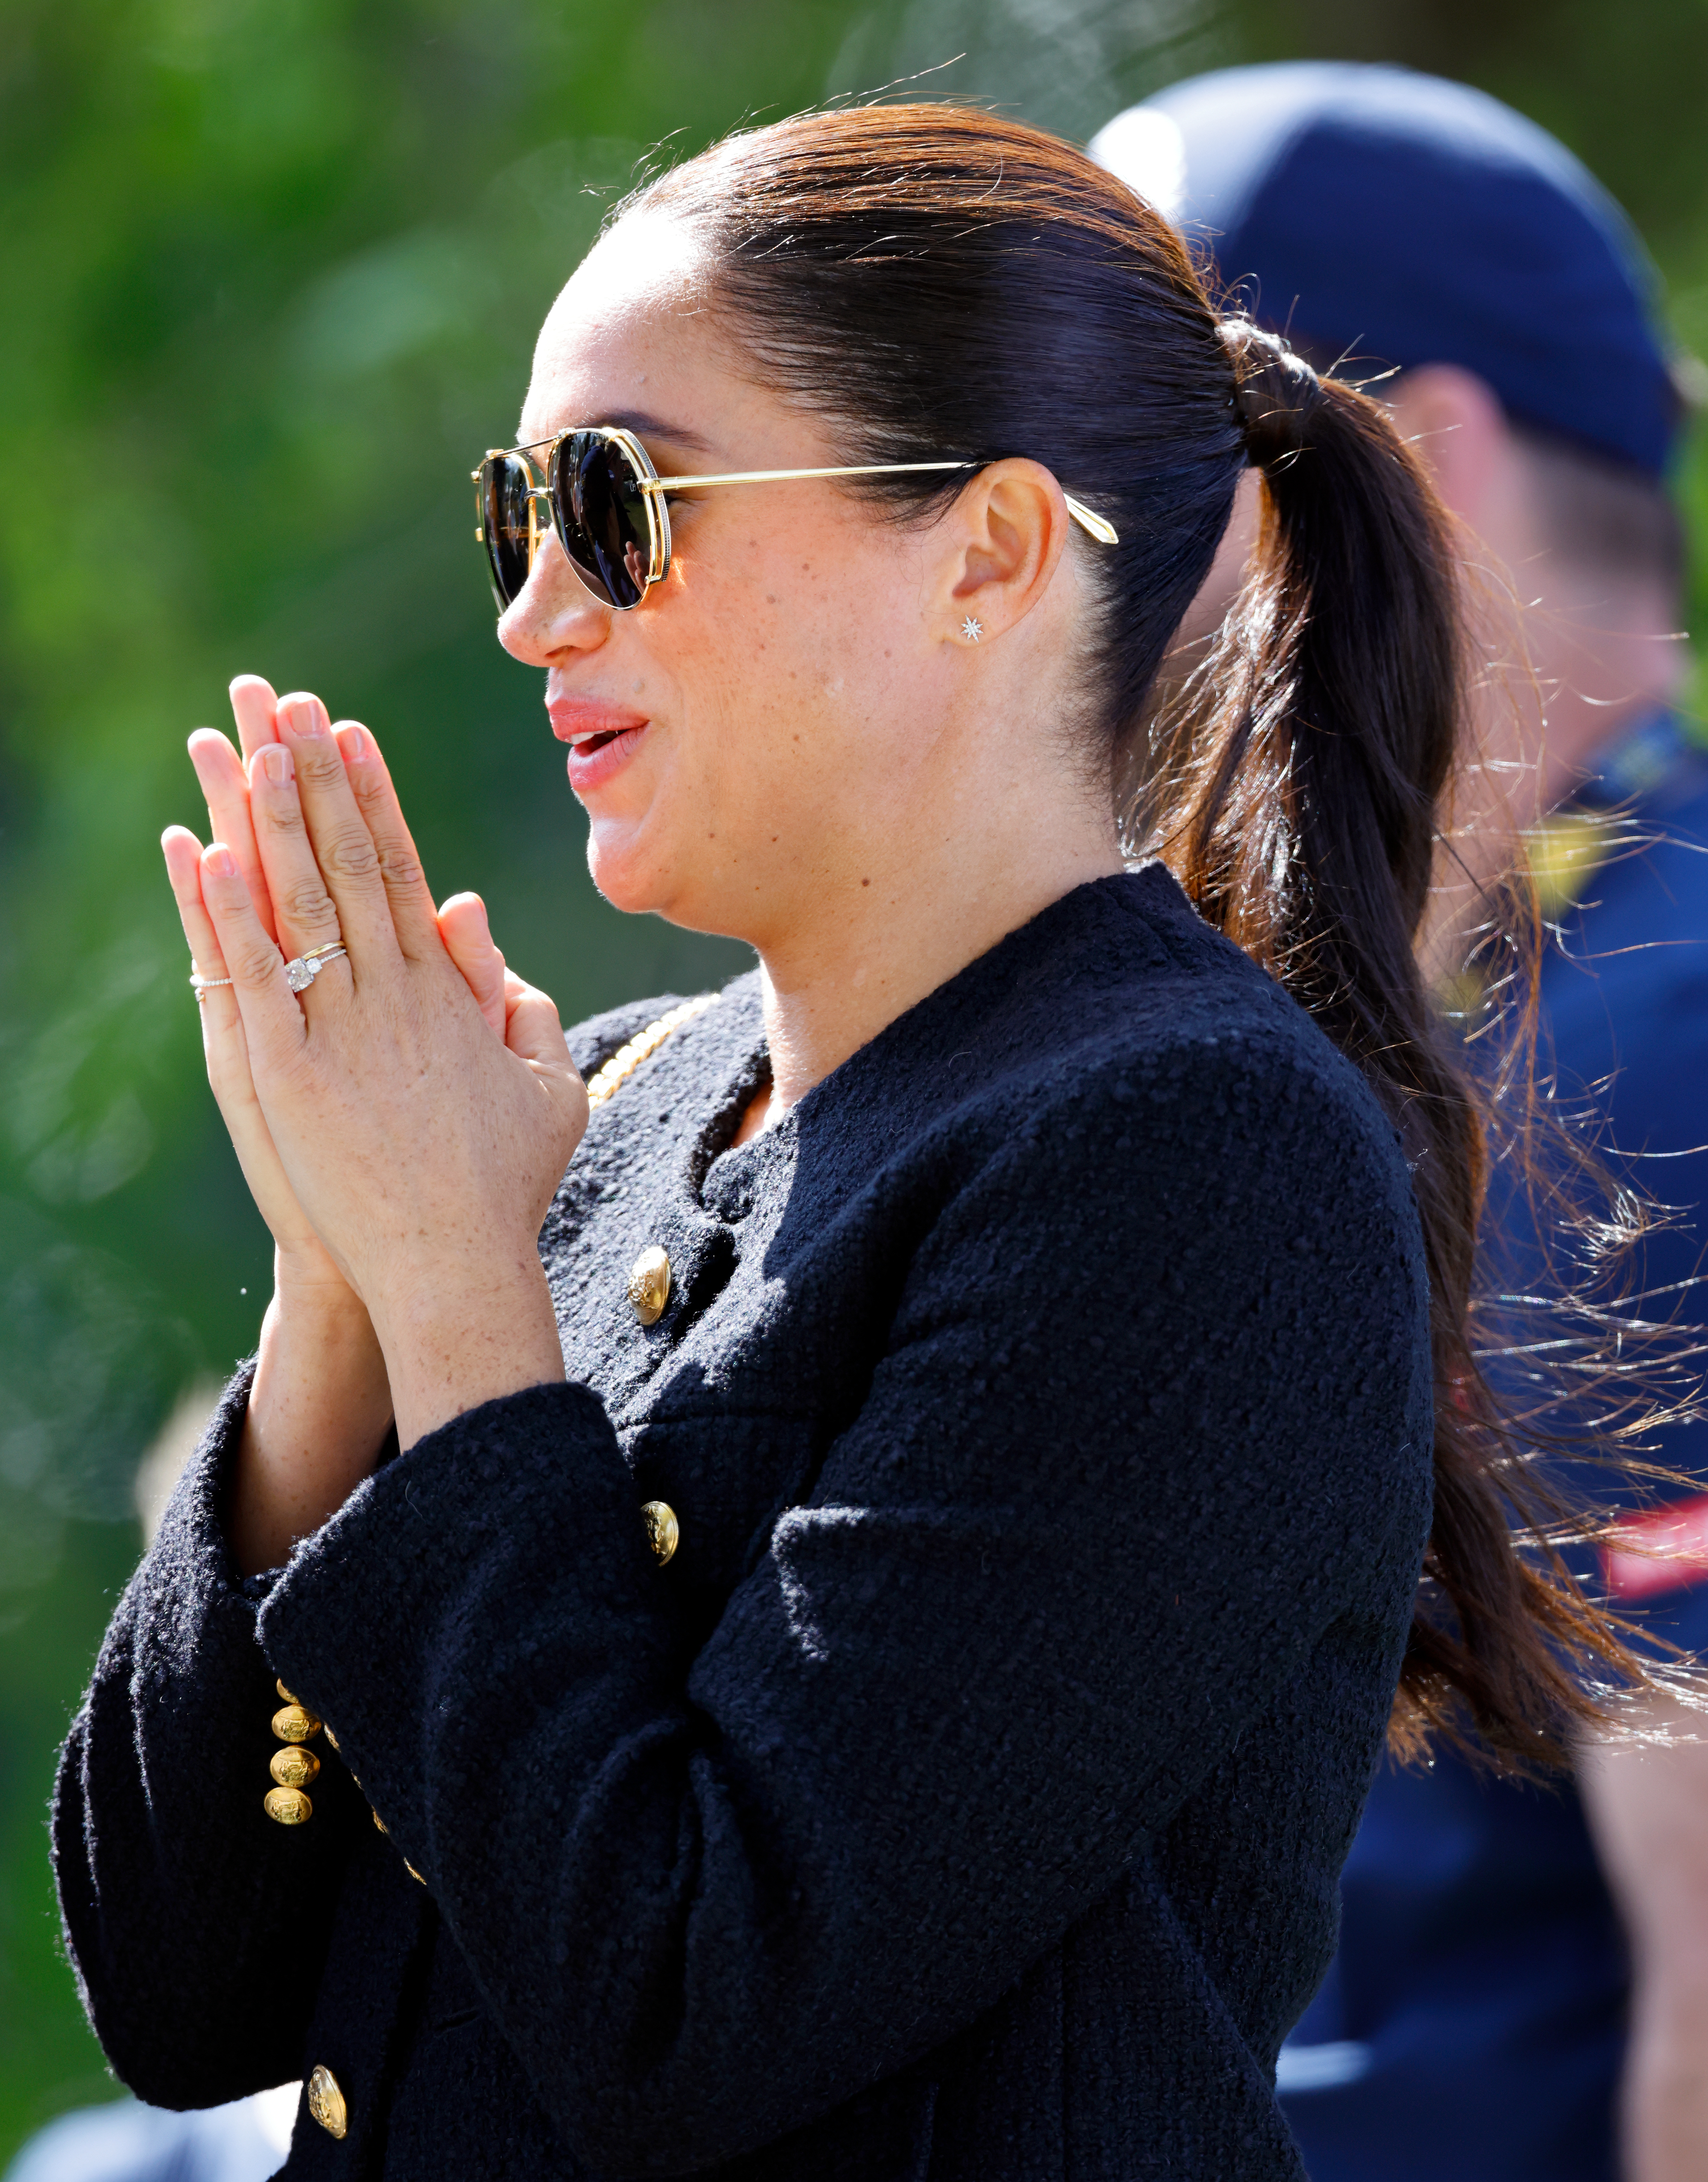 Meghan, Duchess of Sussex watches the Land Rover Driving Challenge, on day 1 of the Invictus Games 2020 at Zuiderpark on April 16, 2022 in The Hague, Netherlands. | Source: Getty Images